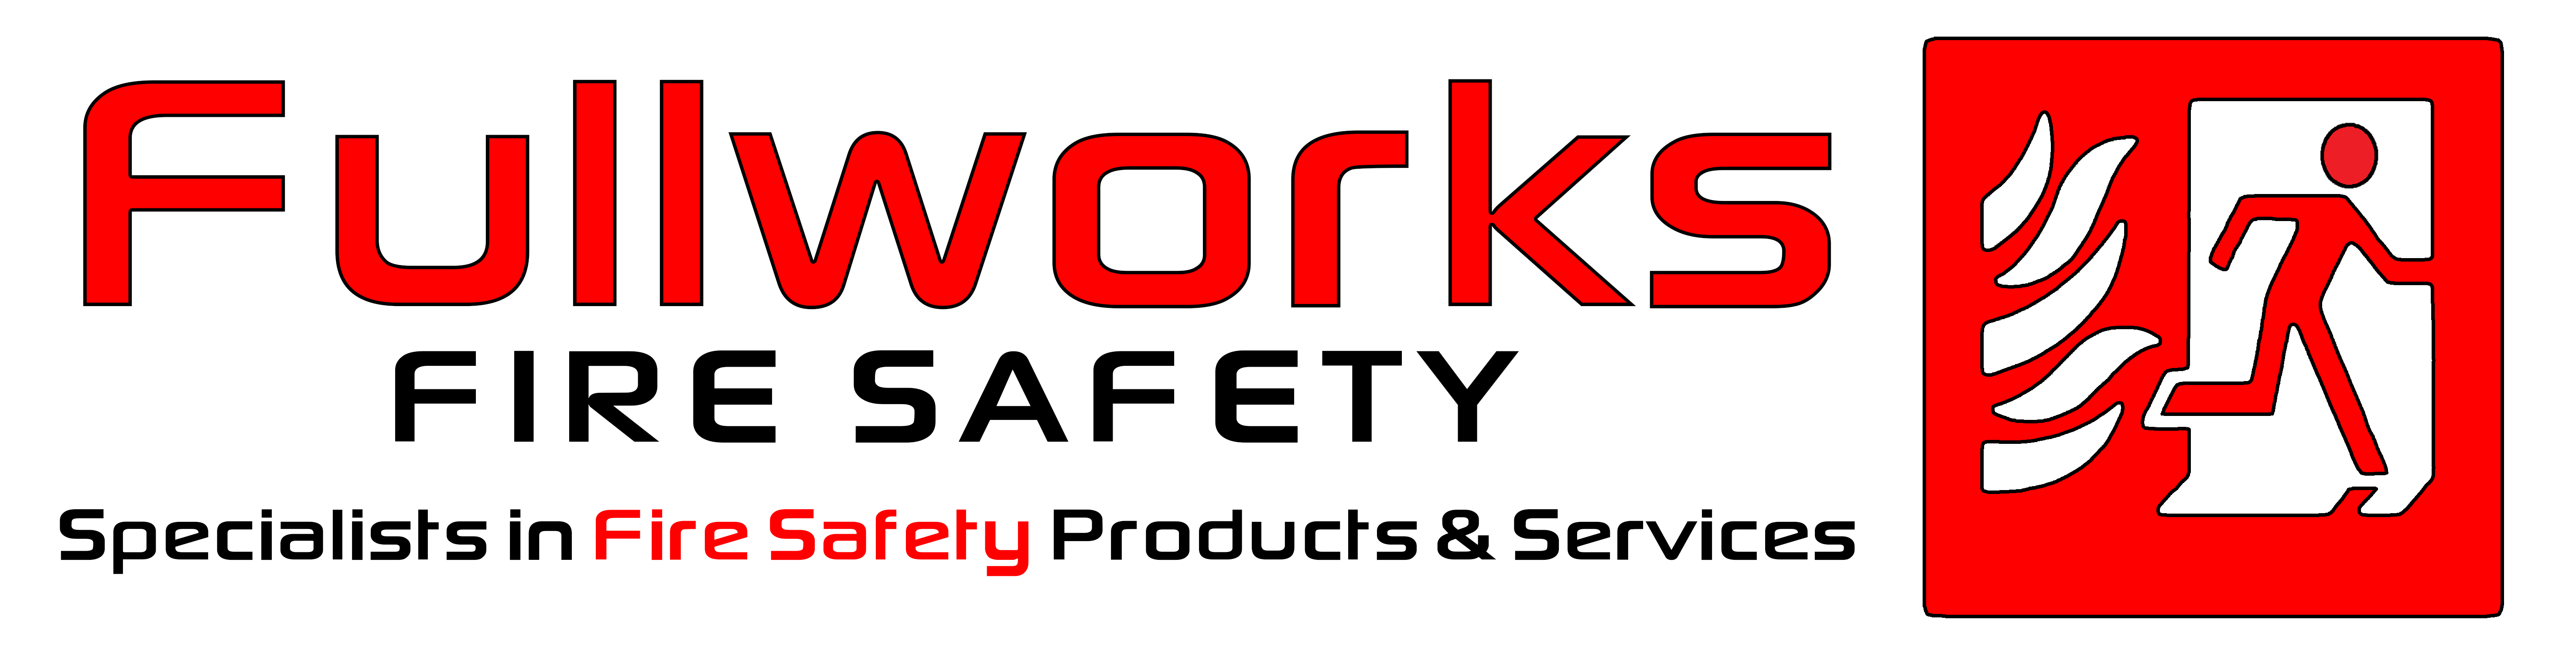 Fullworks Fire Safety